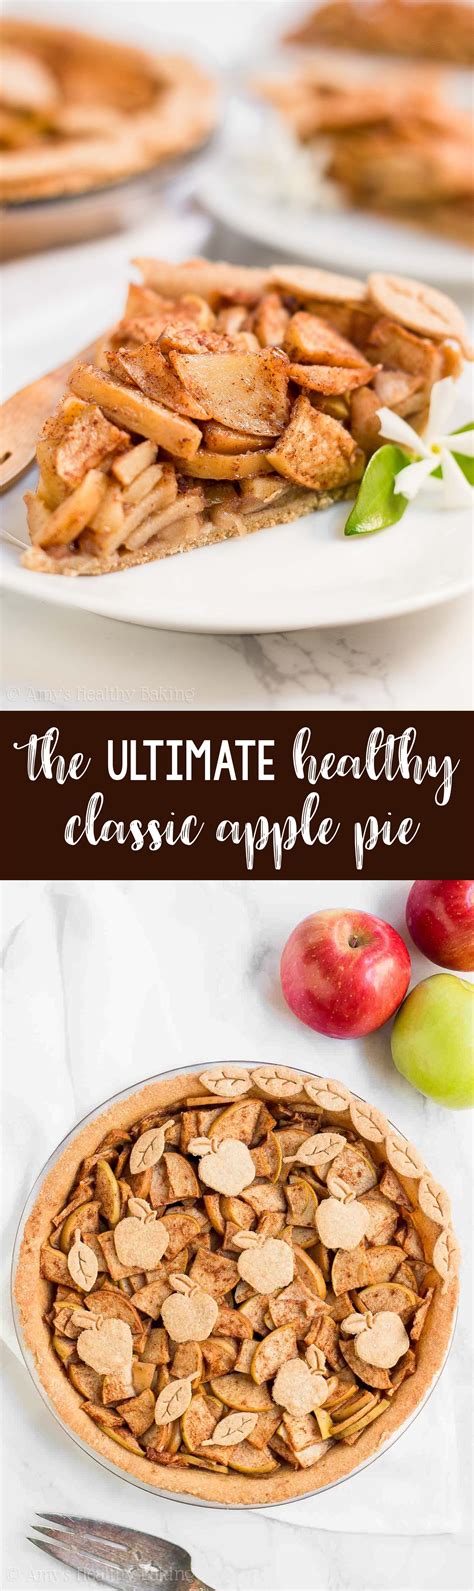 Fill with the apple filling and top with latticework crust. The ULTIMATE Healthy Apple Pie Recipe - truly the BEST ...